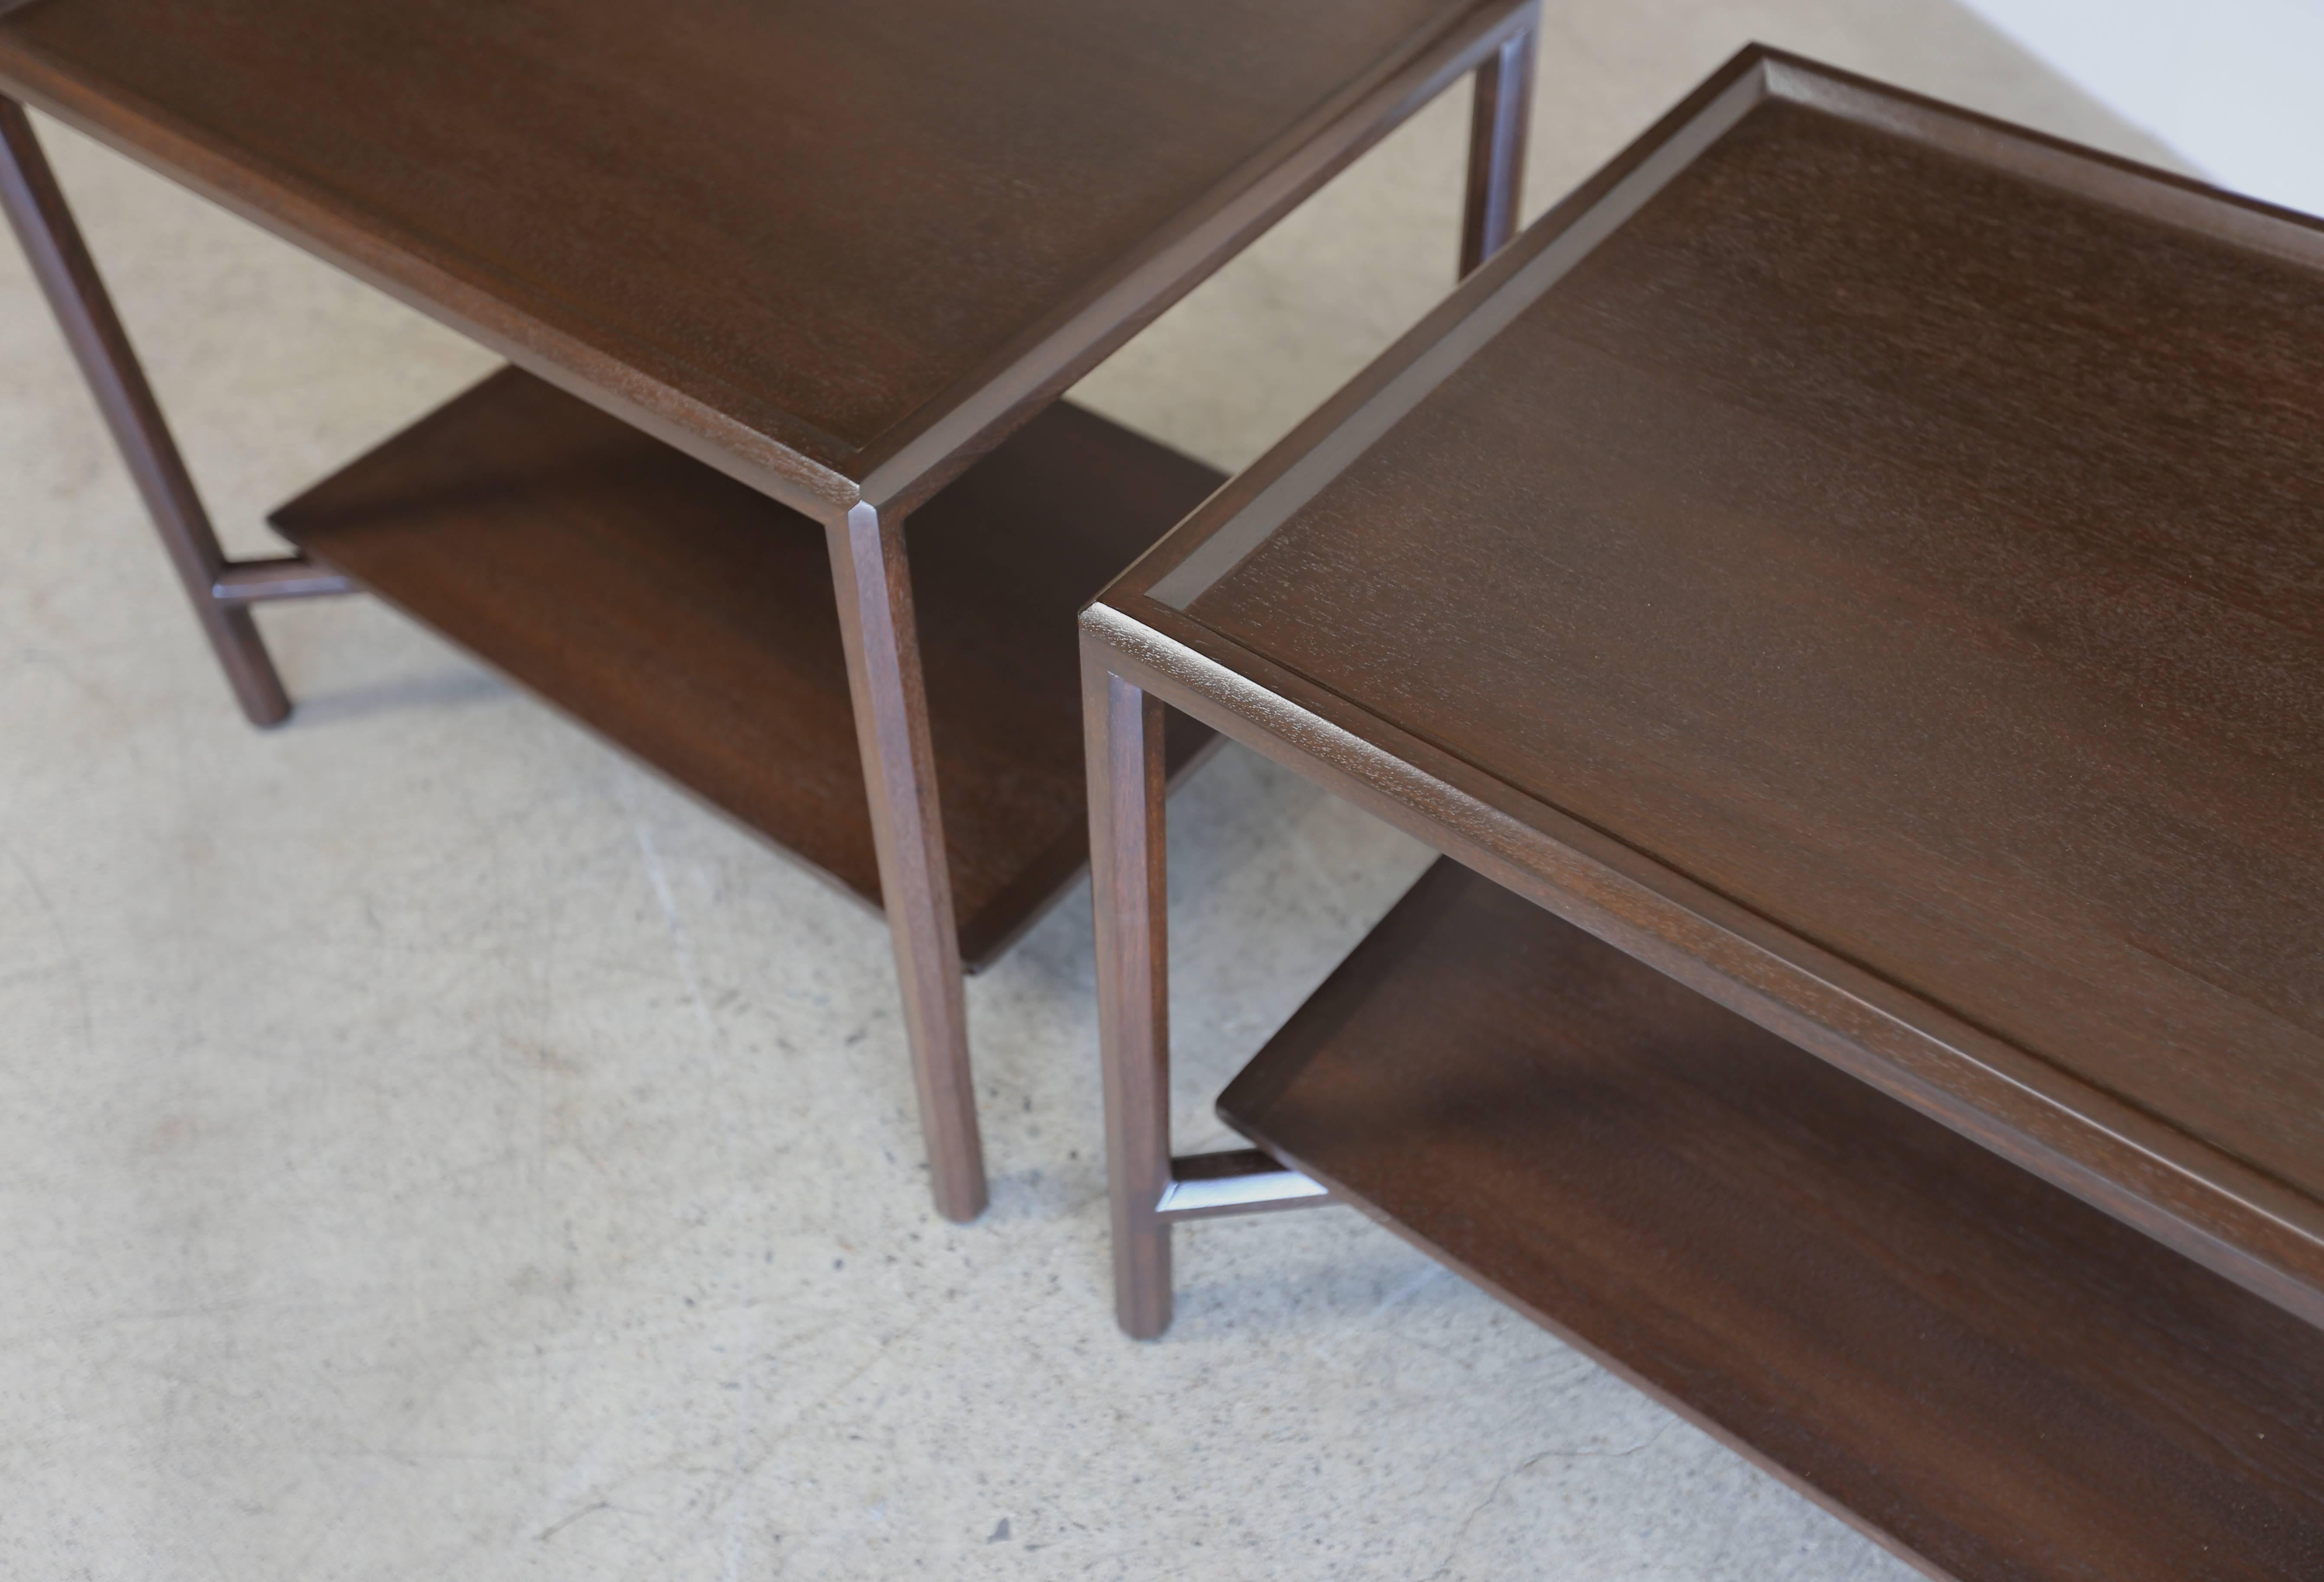 Pair of side tables by Edward Wormley for Dunbar. Espresso finished.